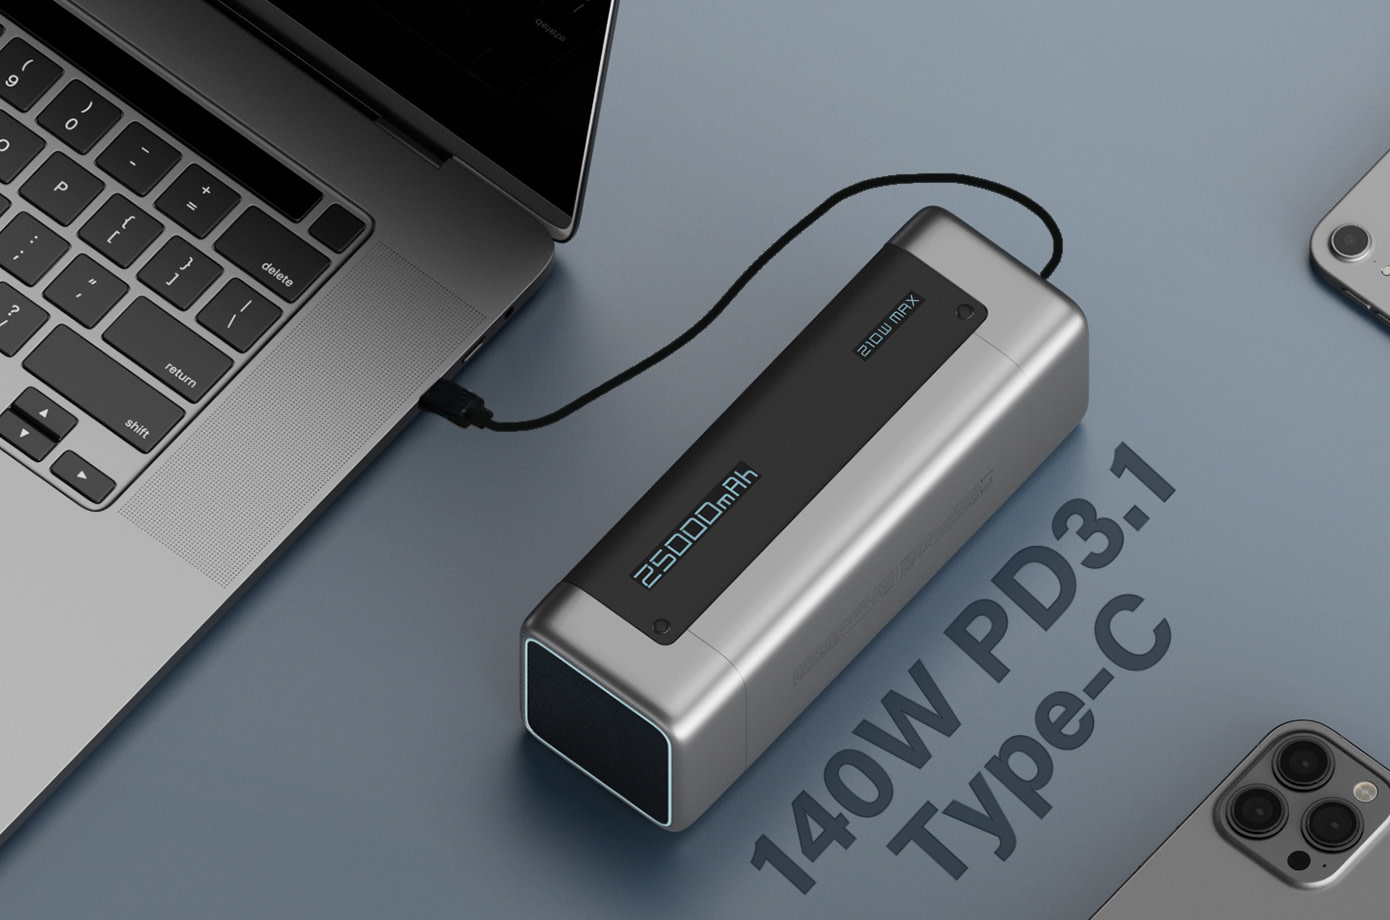 An Ultimate PD3.1 Product Buying Guide: Chargers, Cables, Chips, and More-Chargerlab